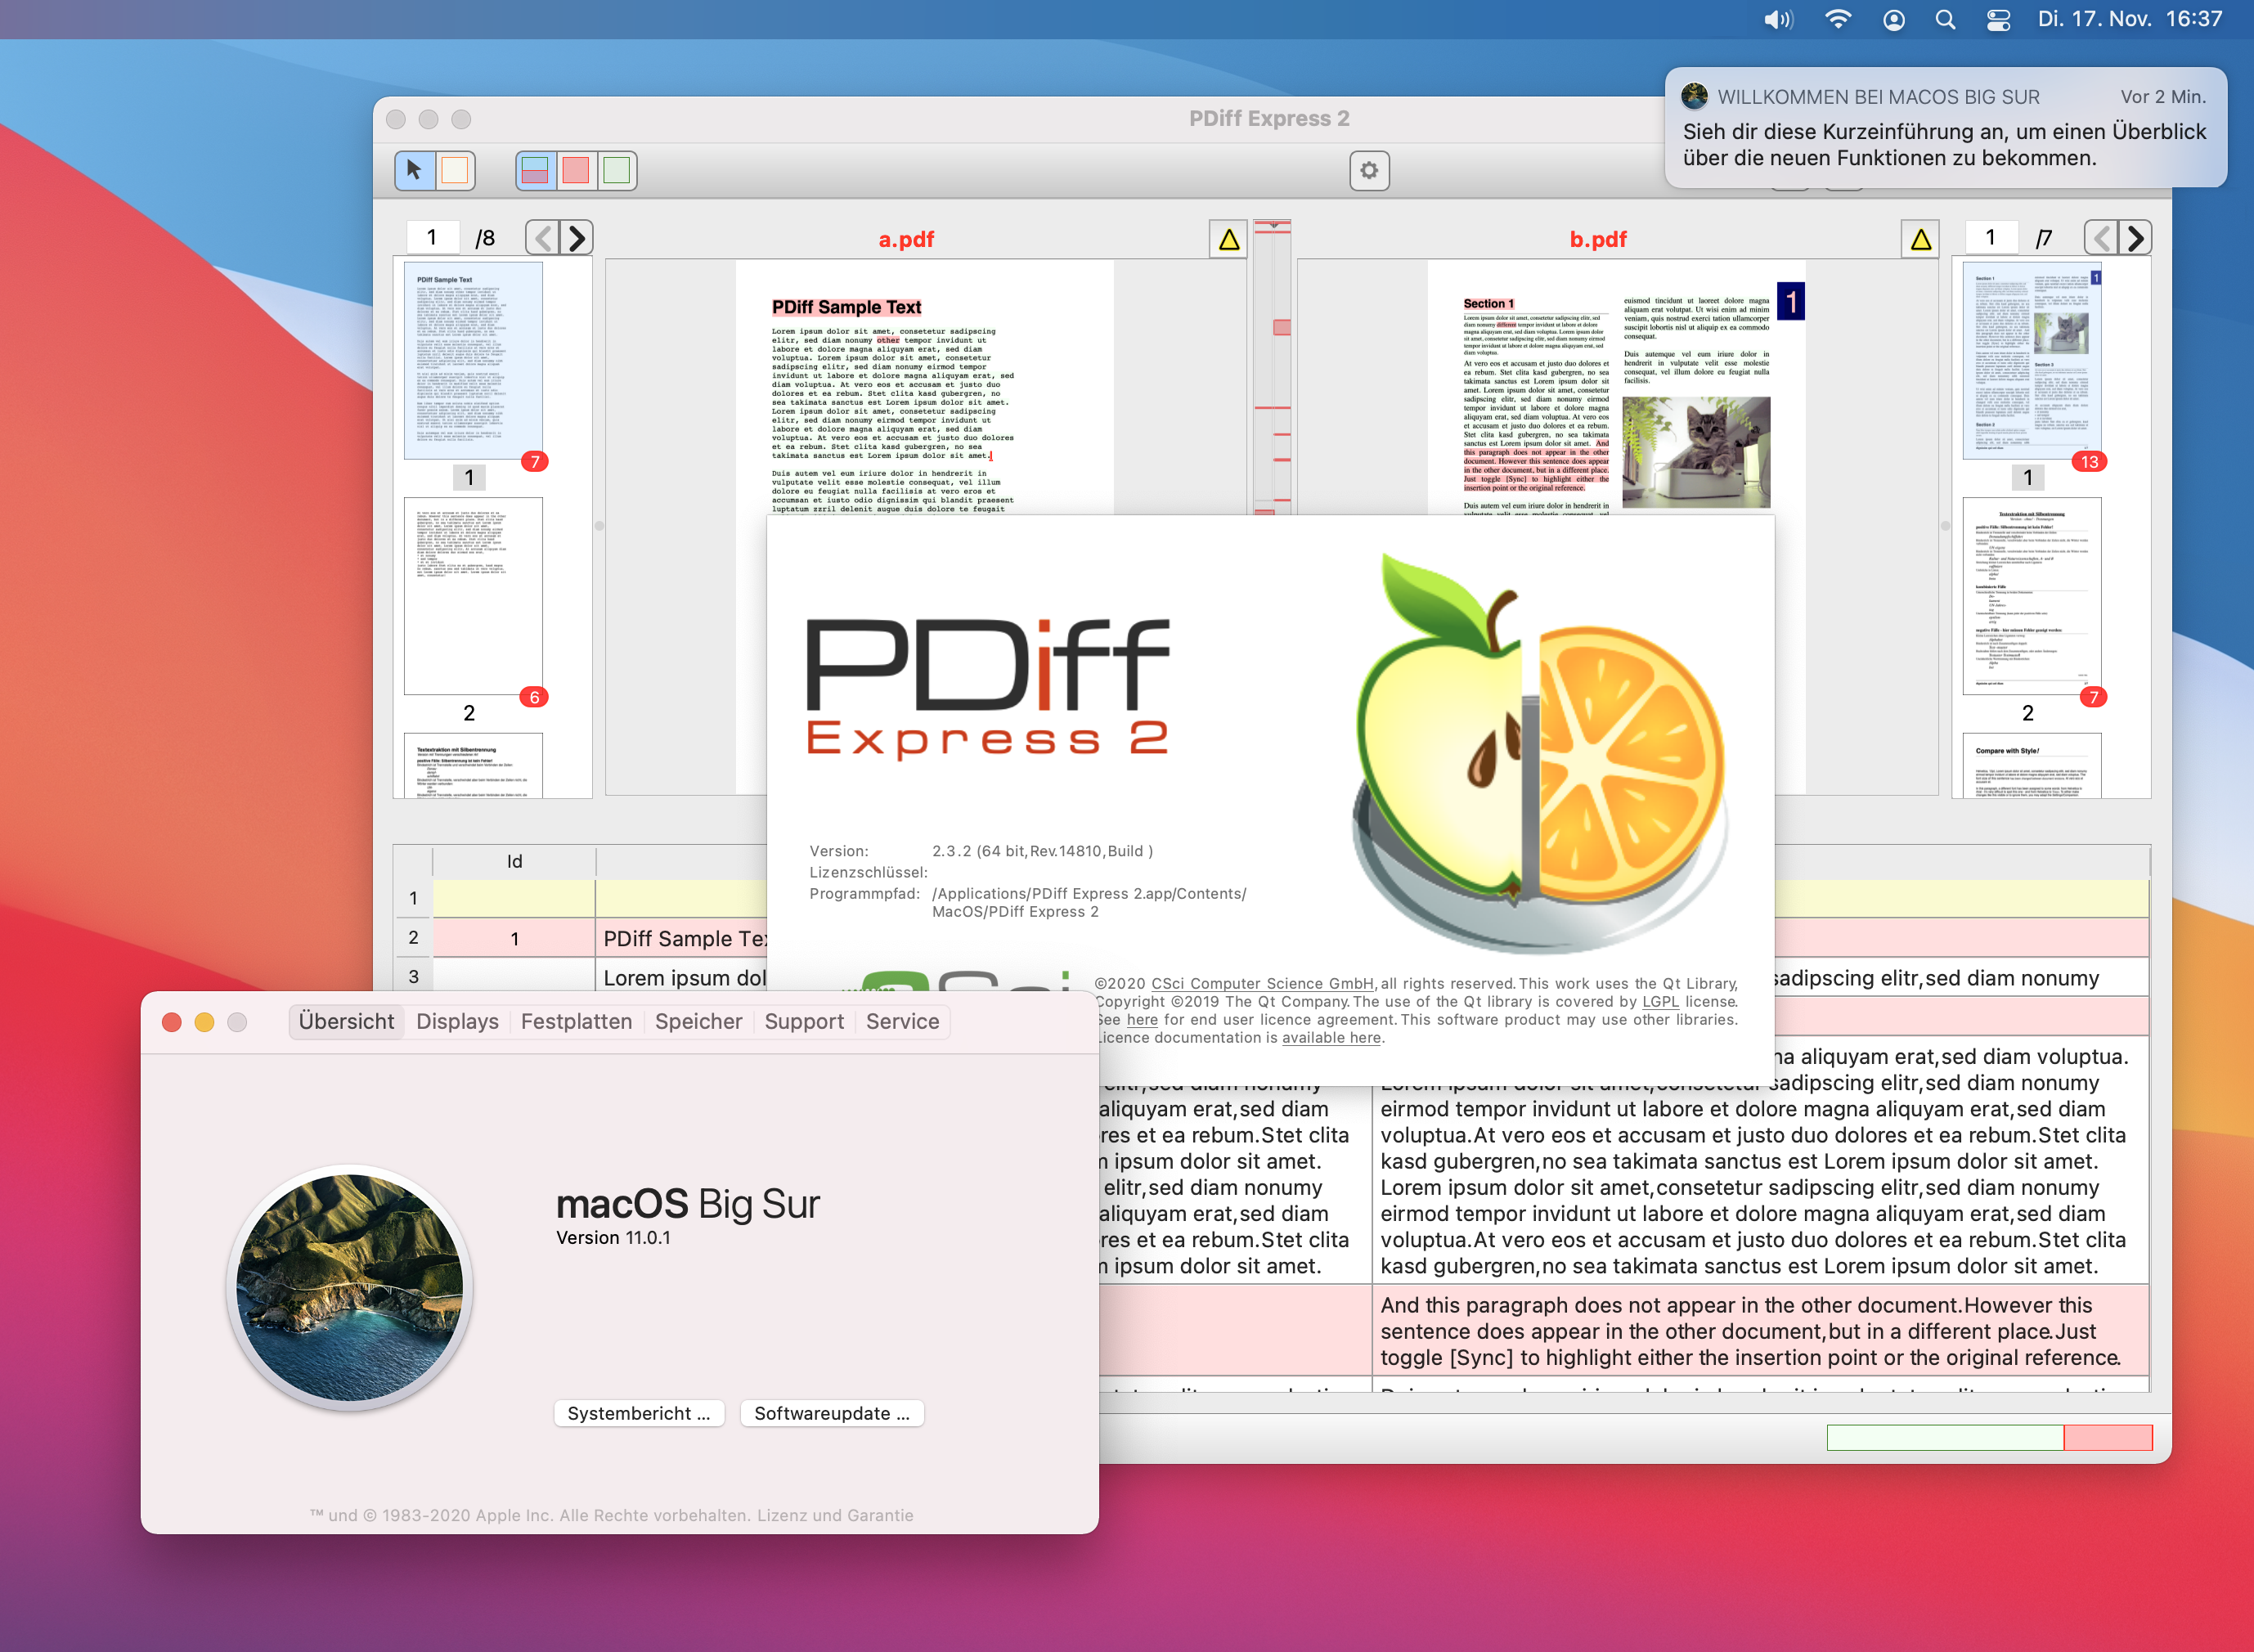 Compare PDF with PDiff Express under macOS 11 Big
Sur